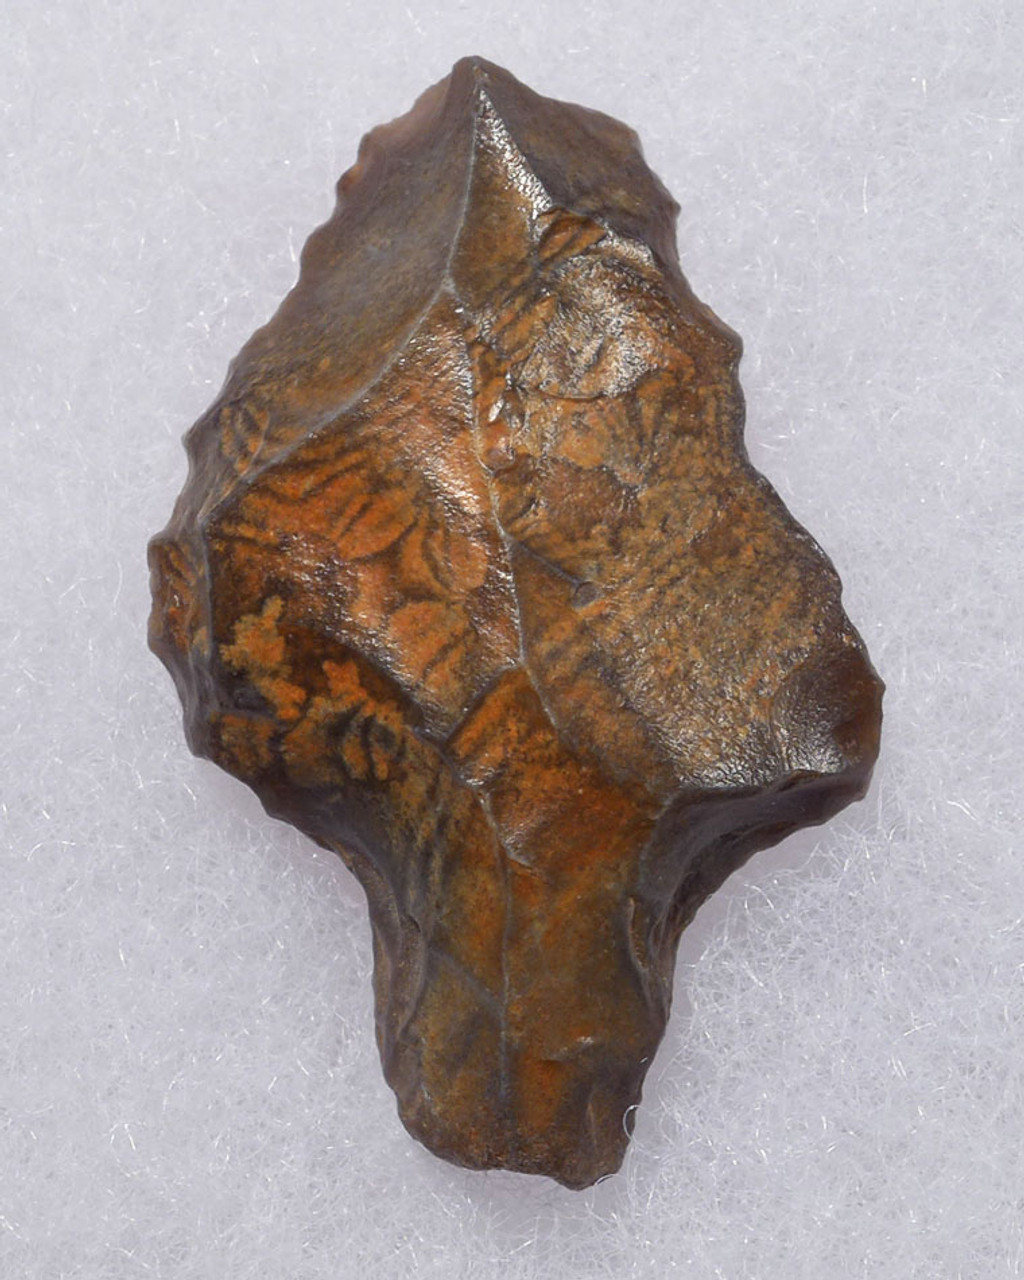 EARLIEST KNOWN TANGED ARROWHEAD OF RARE PETRIFIED WOOD - MIDDLE PALEOLITHIC ATERIAN POINT *AT103